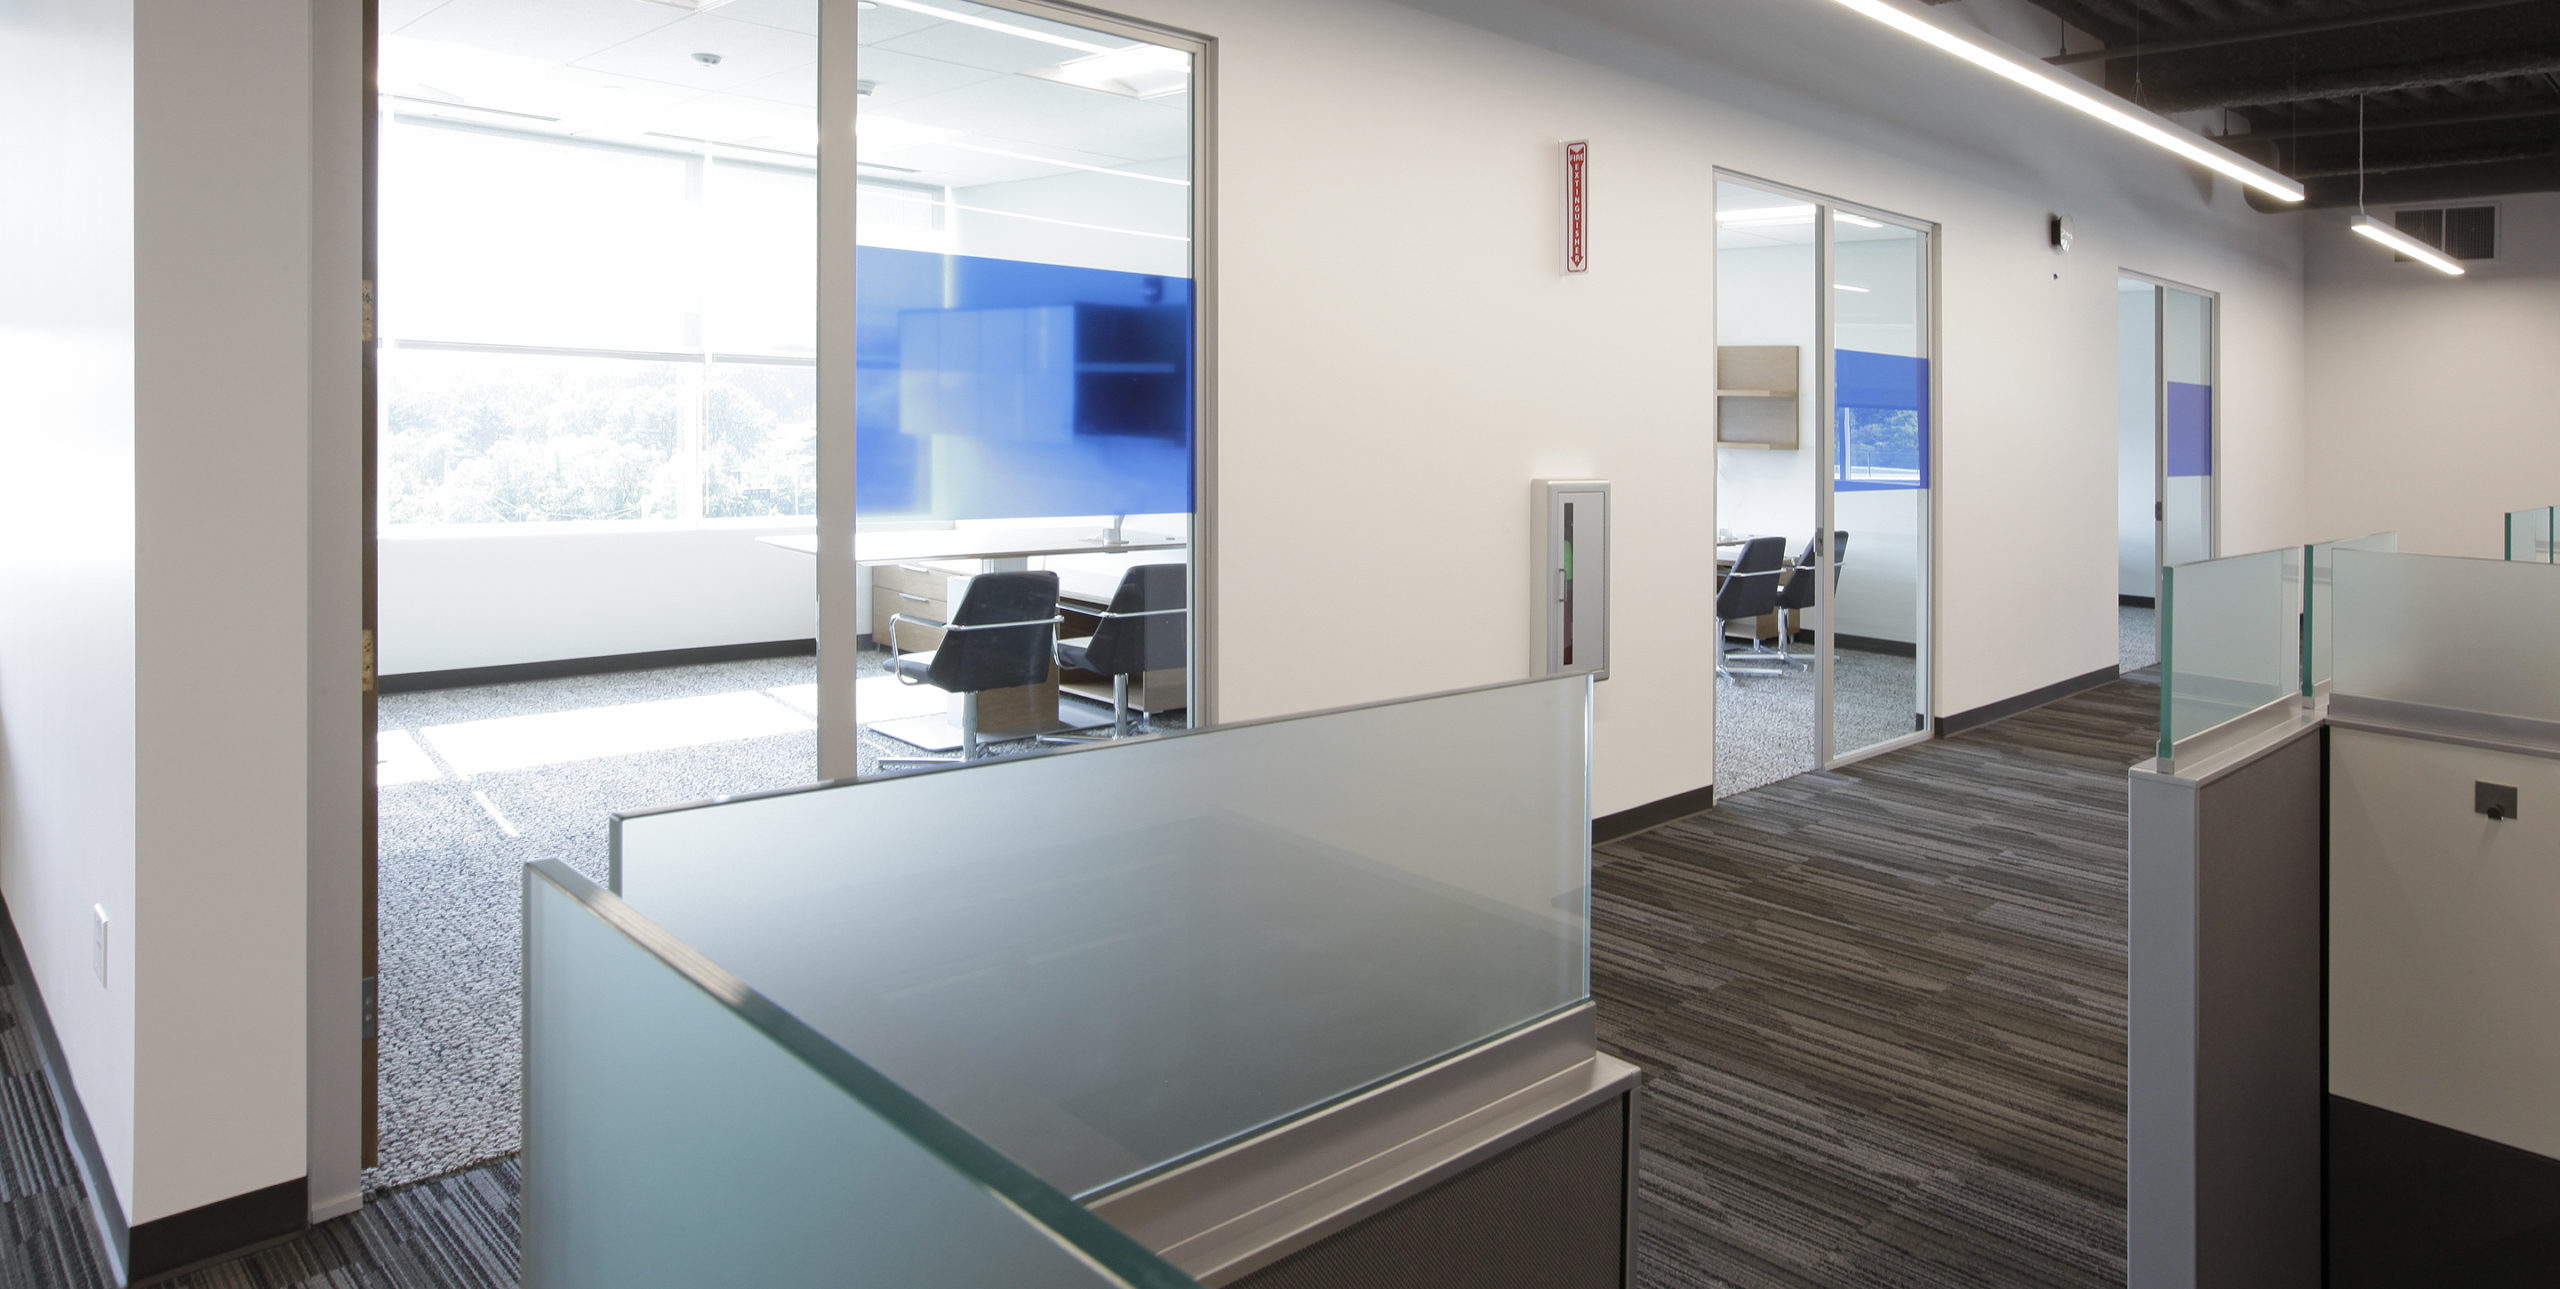 Conference rooms at Dealertrack Technologies